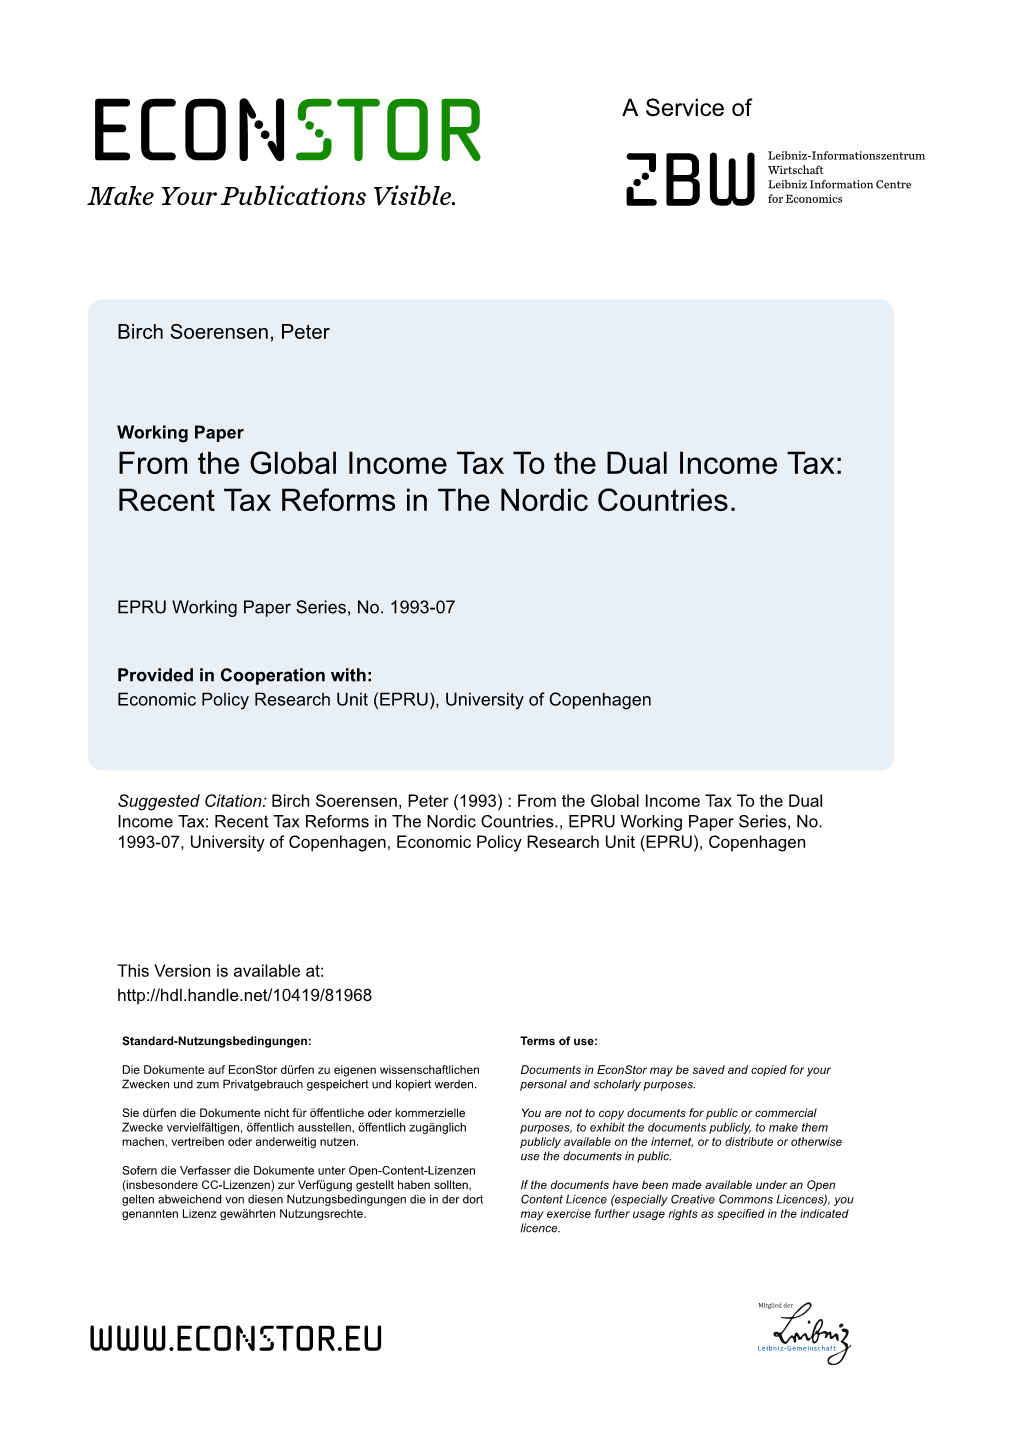 From the Global Income Tax to the Dual Income Tax: Recent Tax Reforms in the Nordic Countries